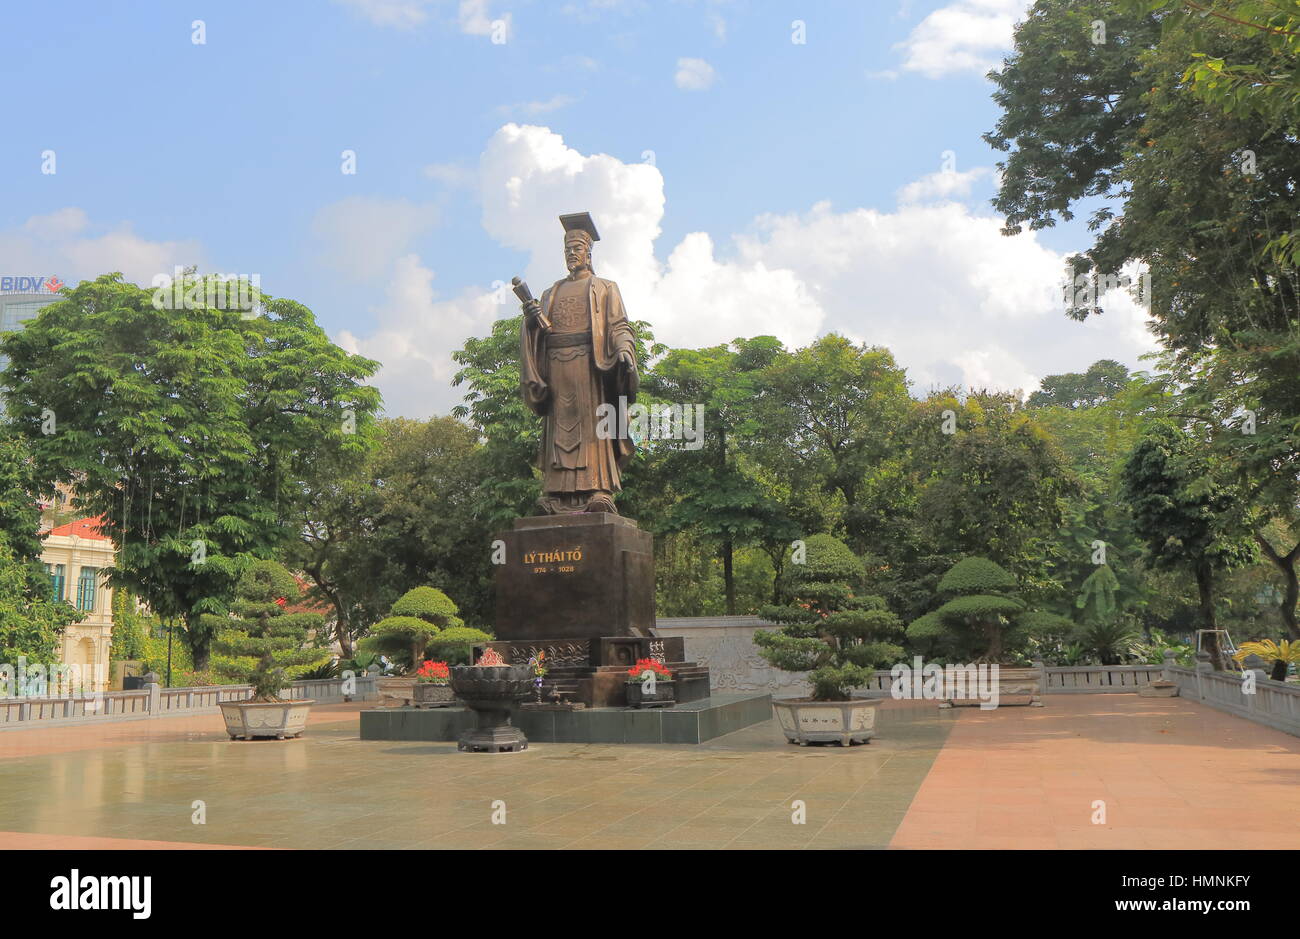 Ly Thai To statue park Hanoi Vietnam. Ly Thai To was Annams first emperor and the founder of the Later Ly Dynasty Stock Photo